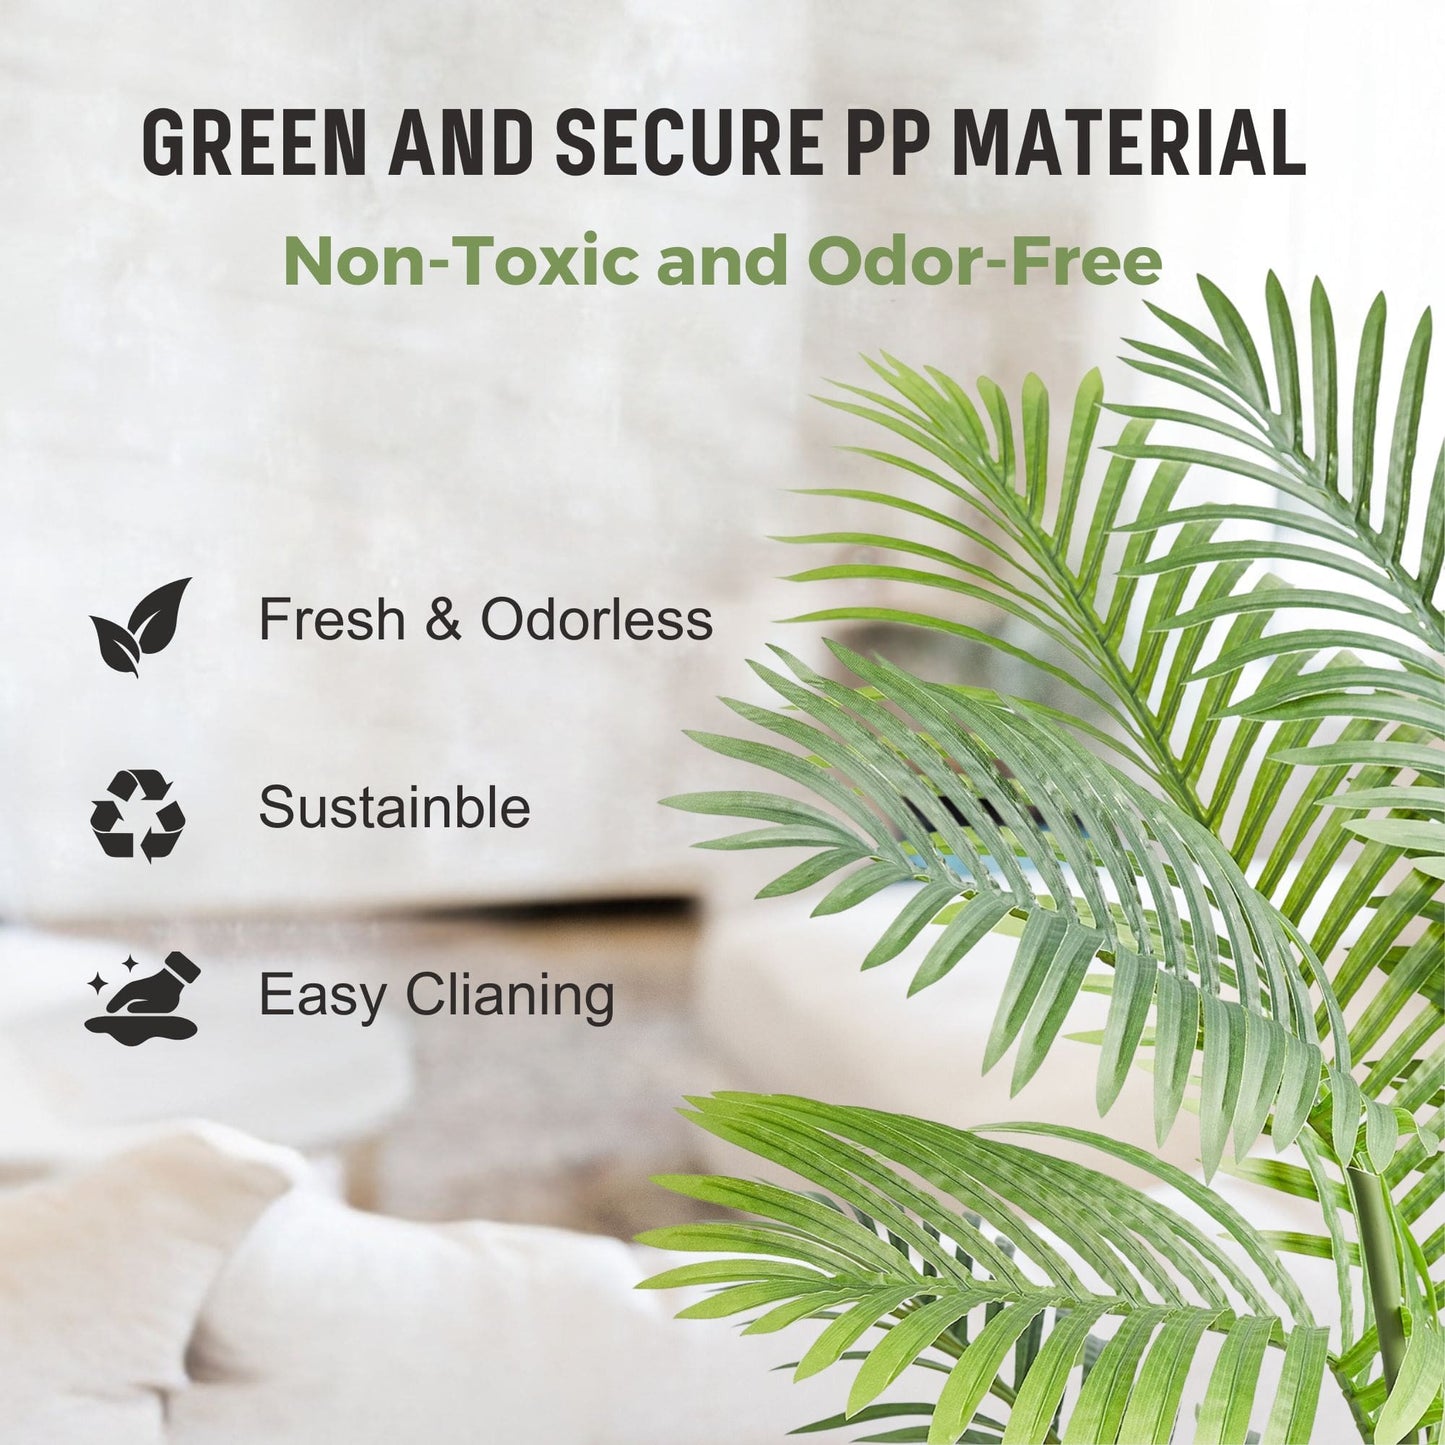 Eco-friendly and safe PP material used for a lifelike artificial palm tree